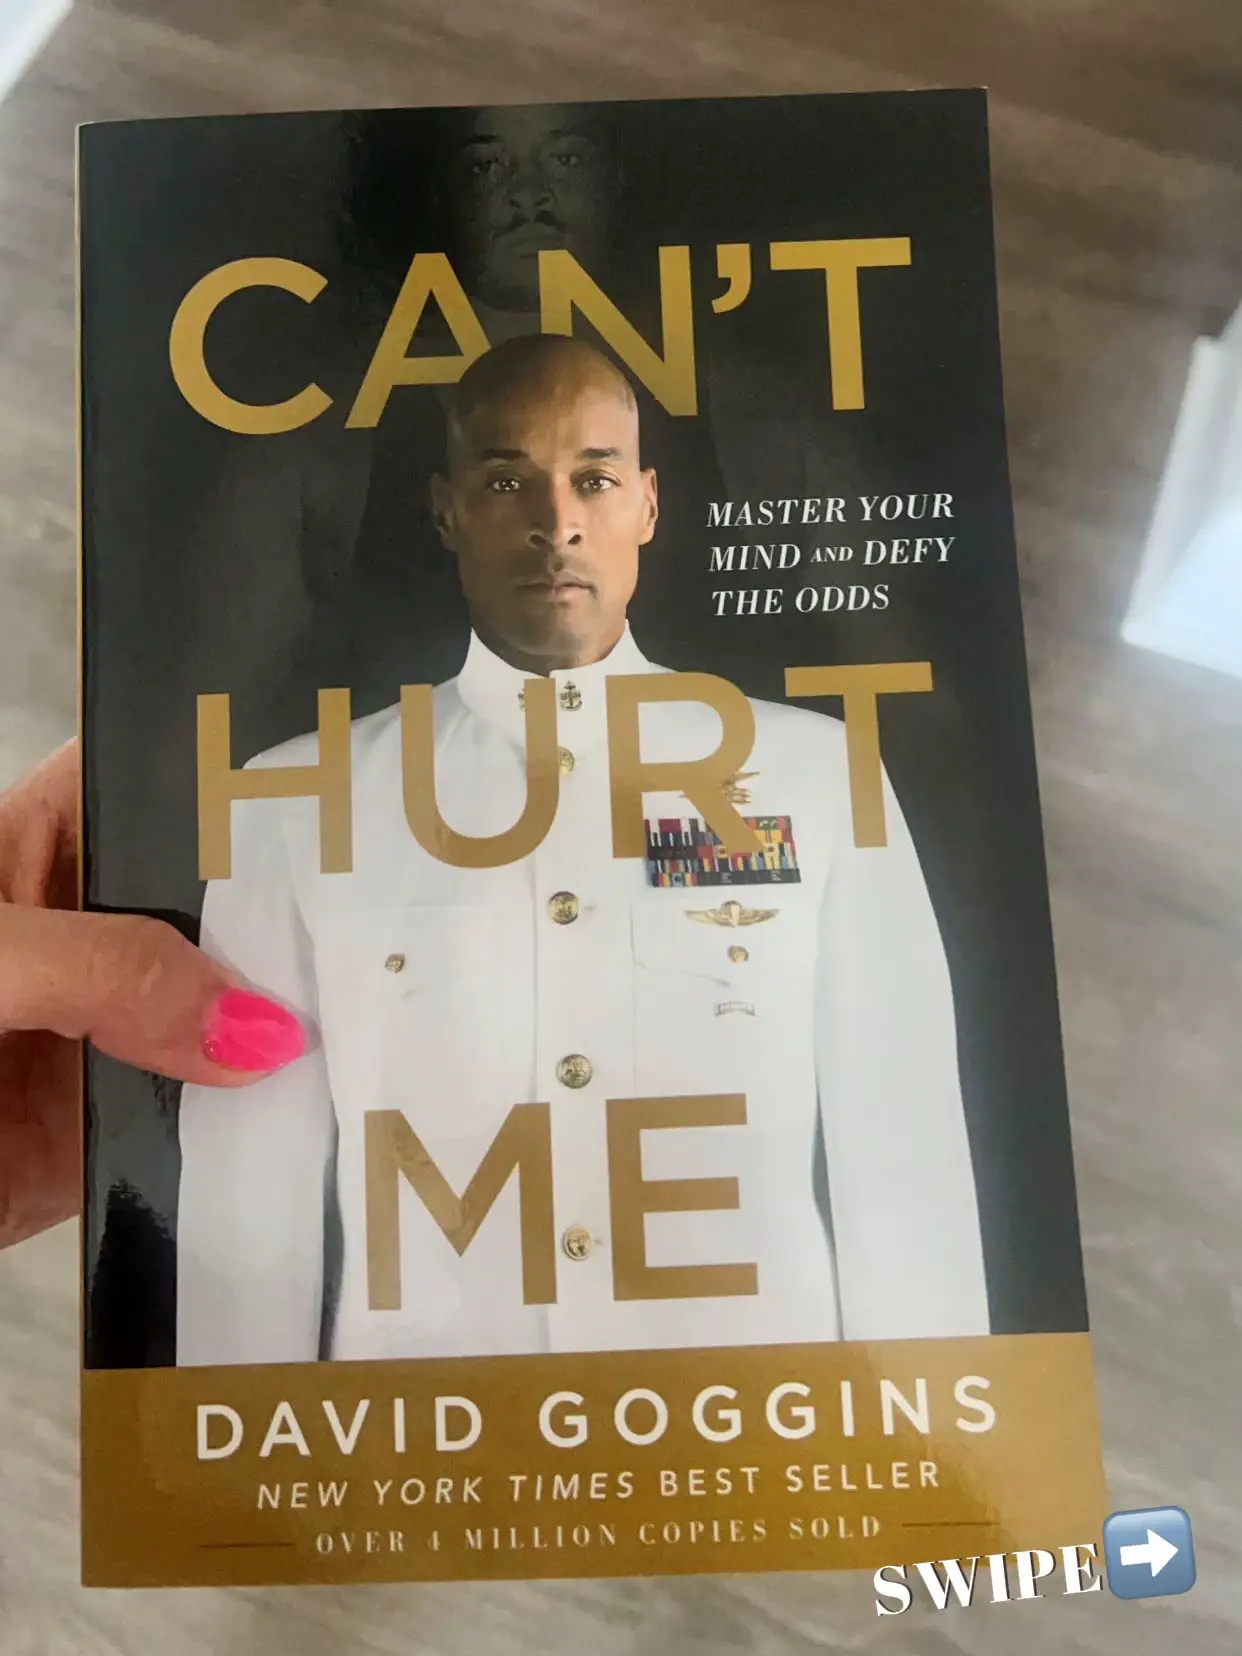 29: Becoming Uncommon Among the Uncommon. Lessons From “Can't Hurt Me” by  David Goggins (Part 5)